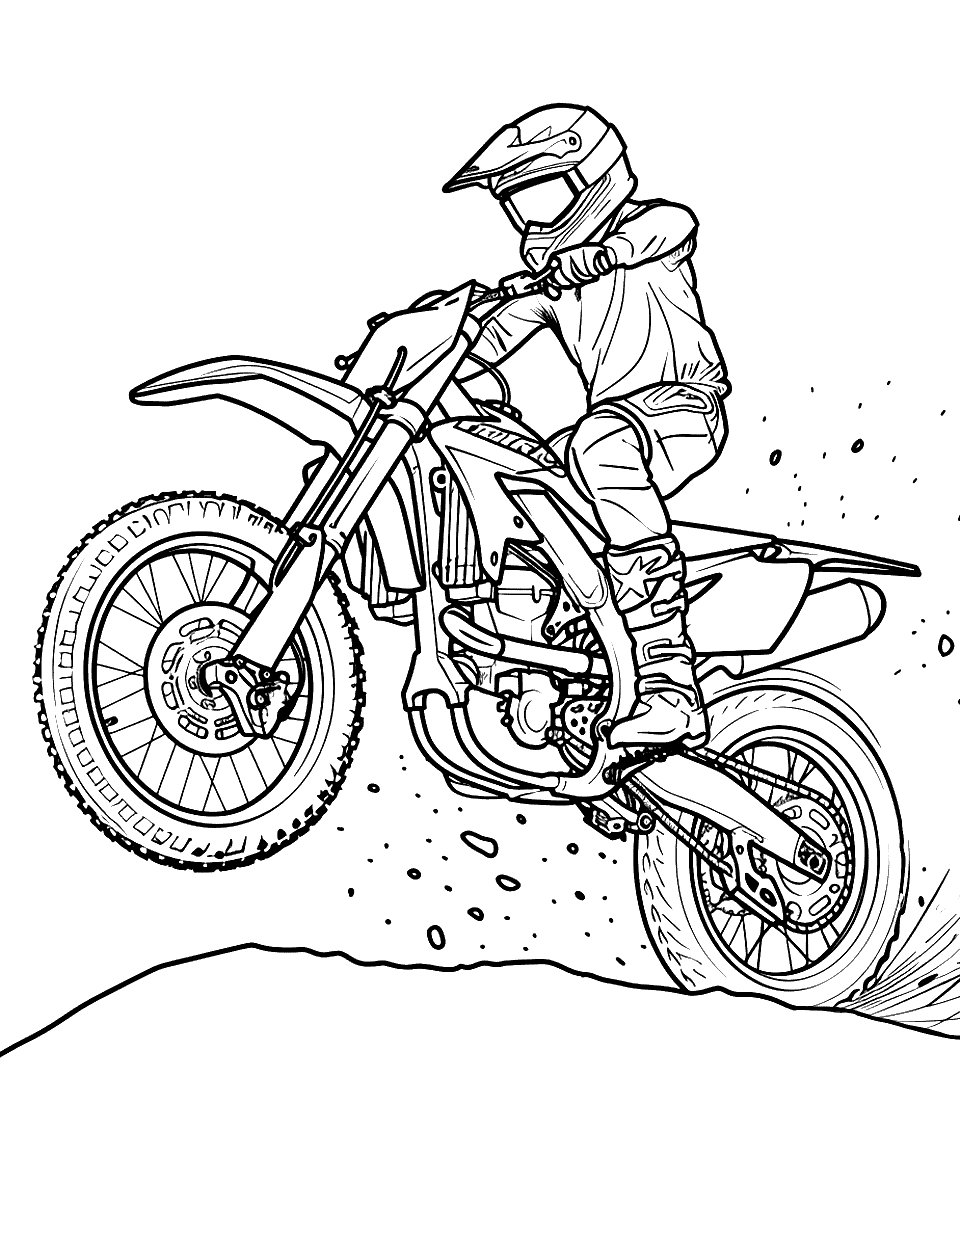 Dirt Bike in Action Motorcycle Coloring Page - A rider on a dirt bike navigating a small mound of dirt, ready to land on the other side.